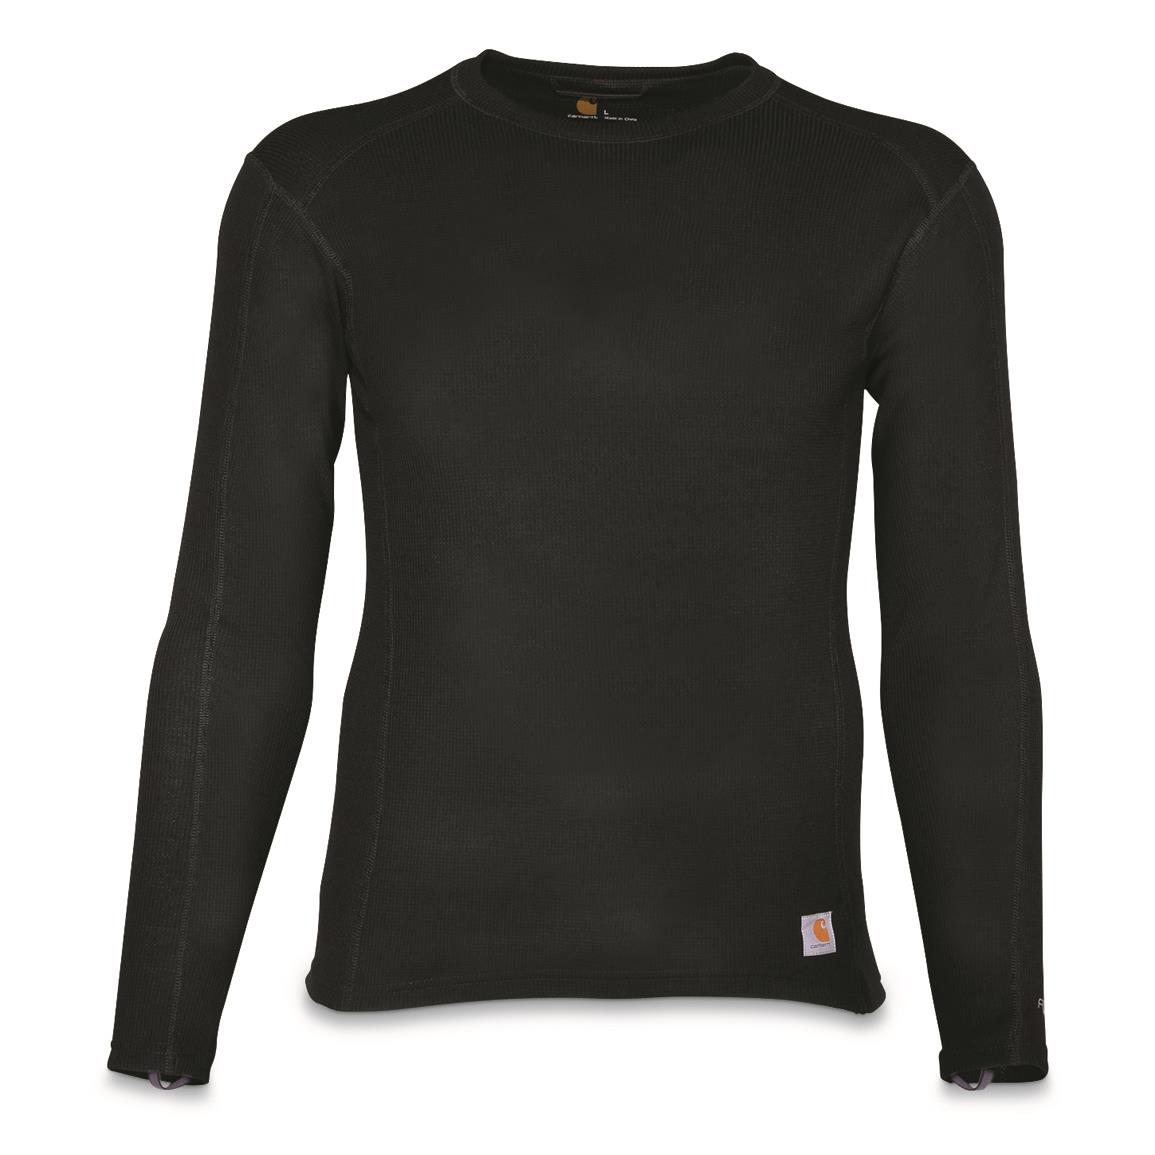 Carhartt Men's Base Force Midweight Classic Crew Base Layer Top, Black